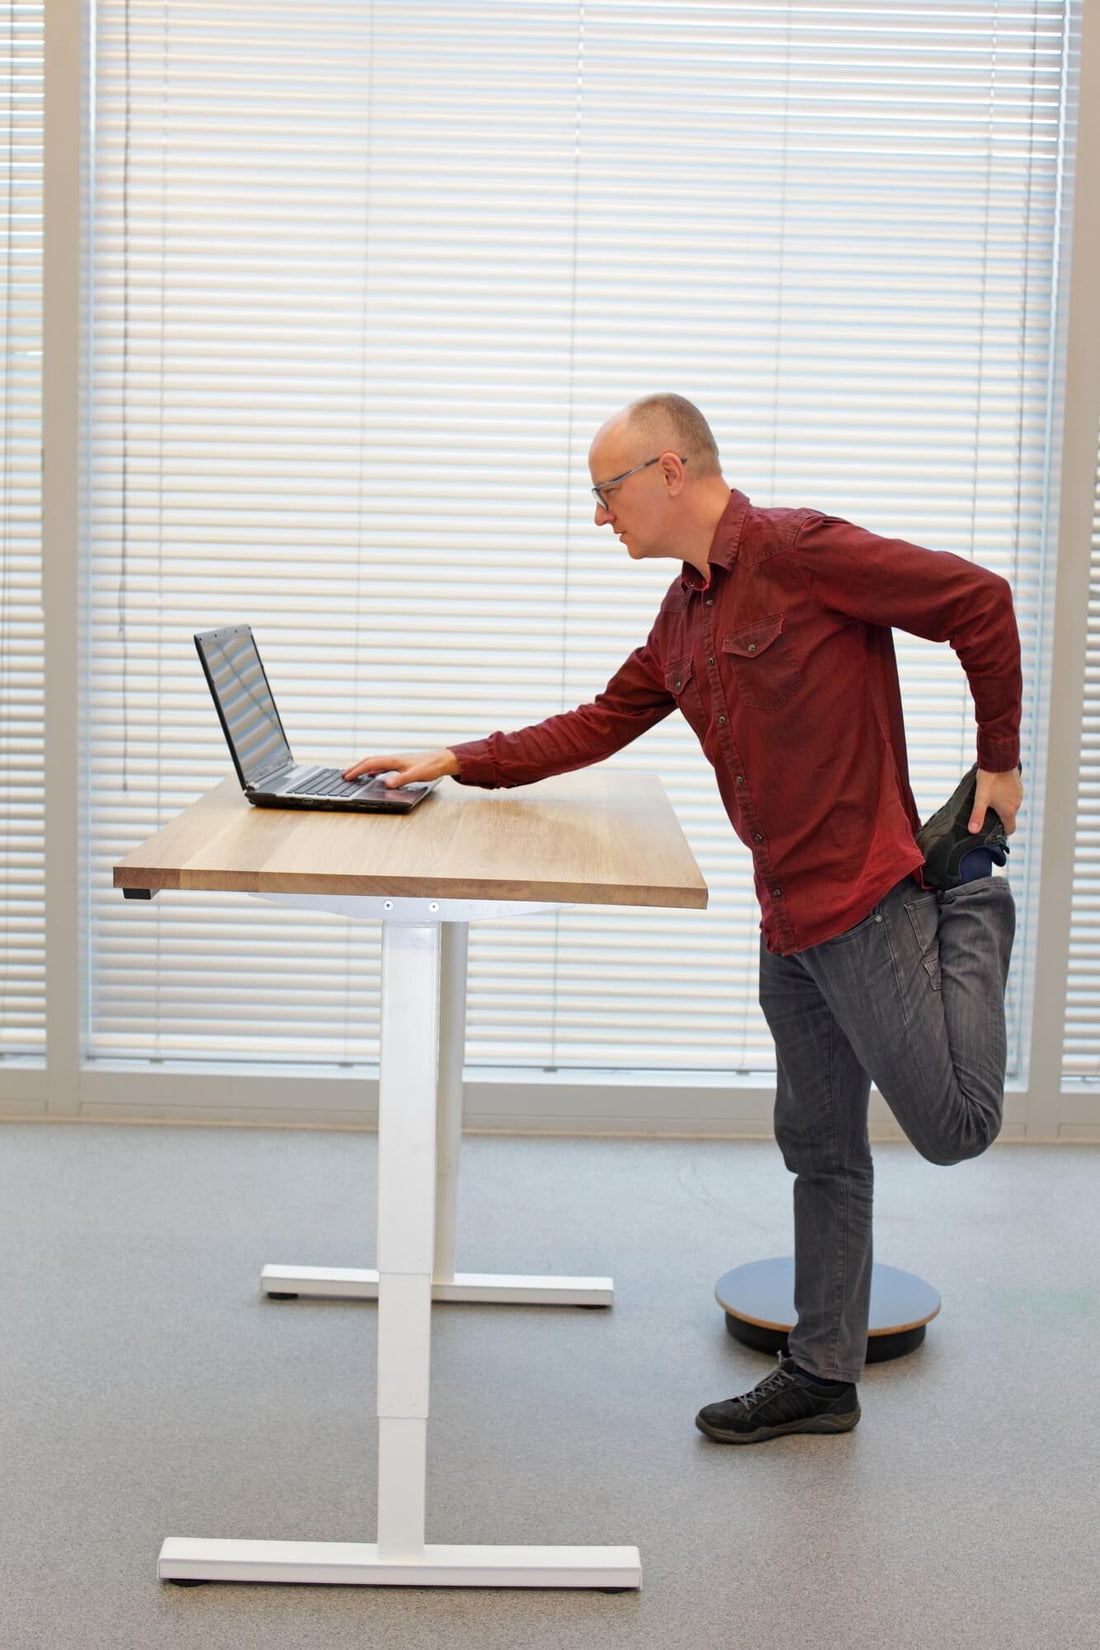 For Standing Desk Workers Only: 4 Must-Have Accessories